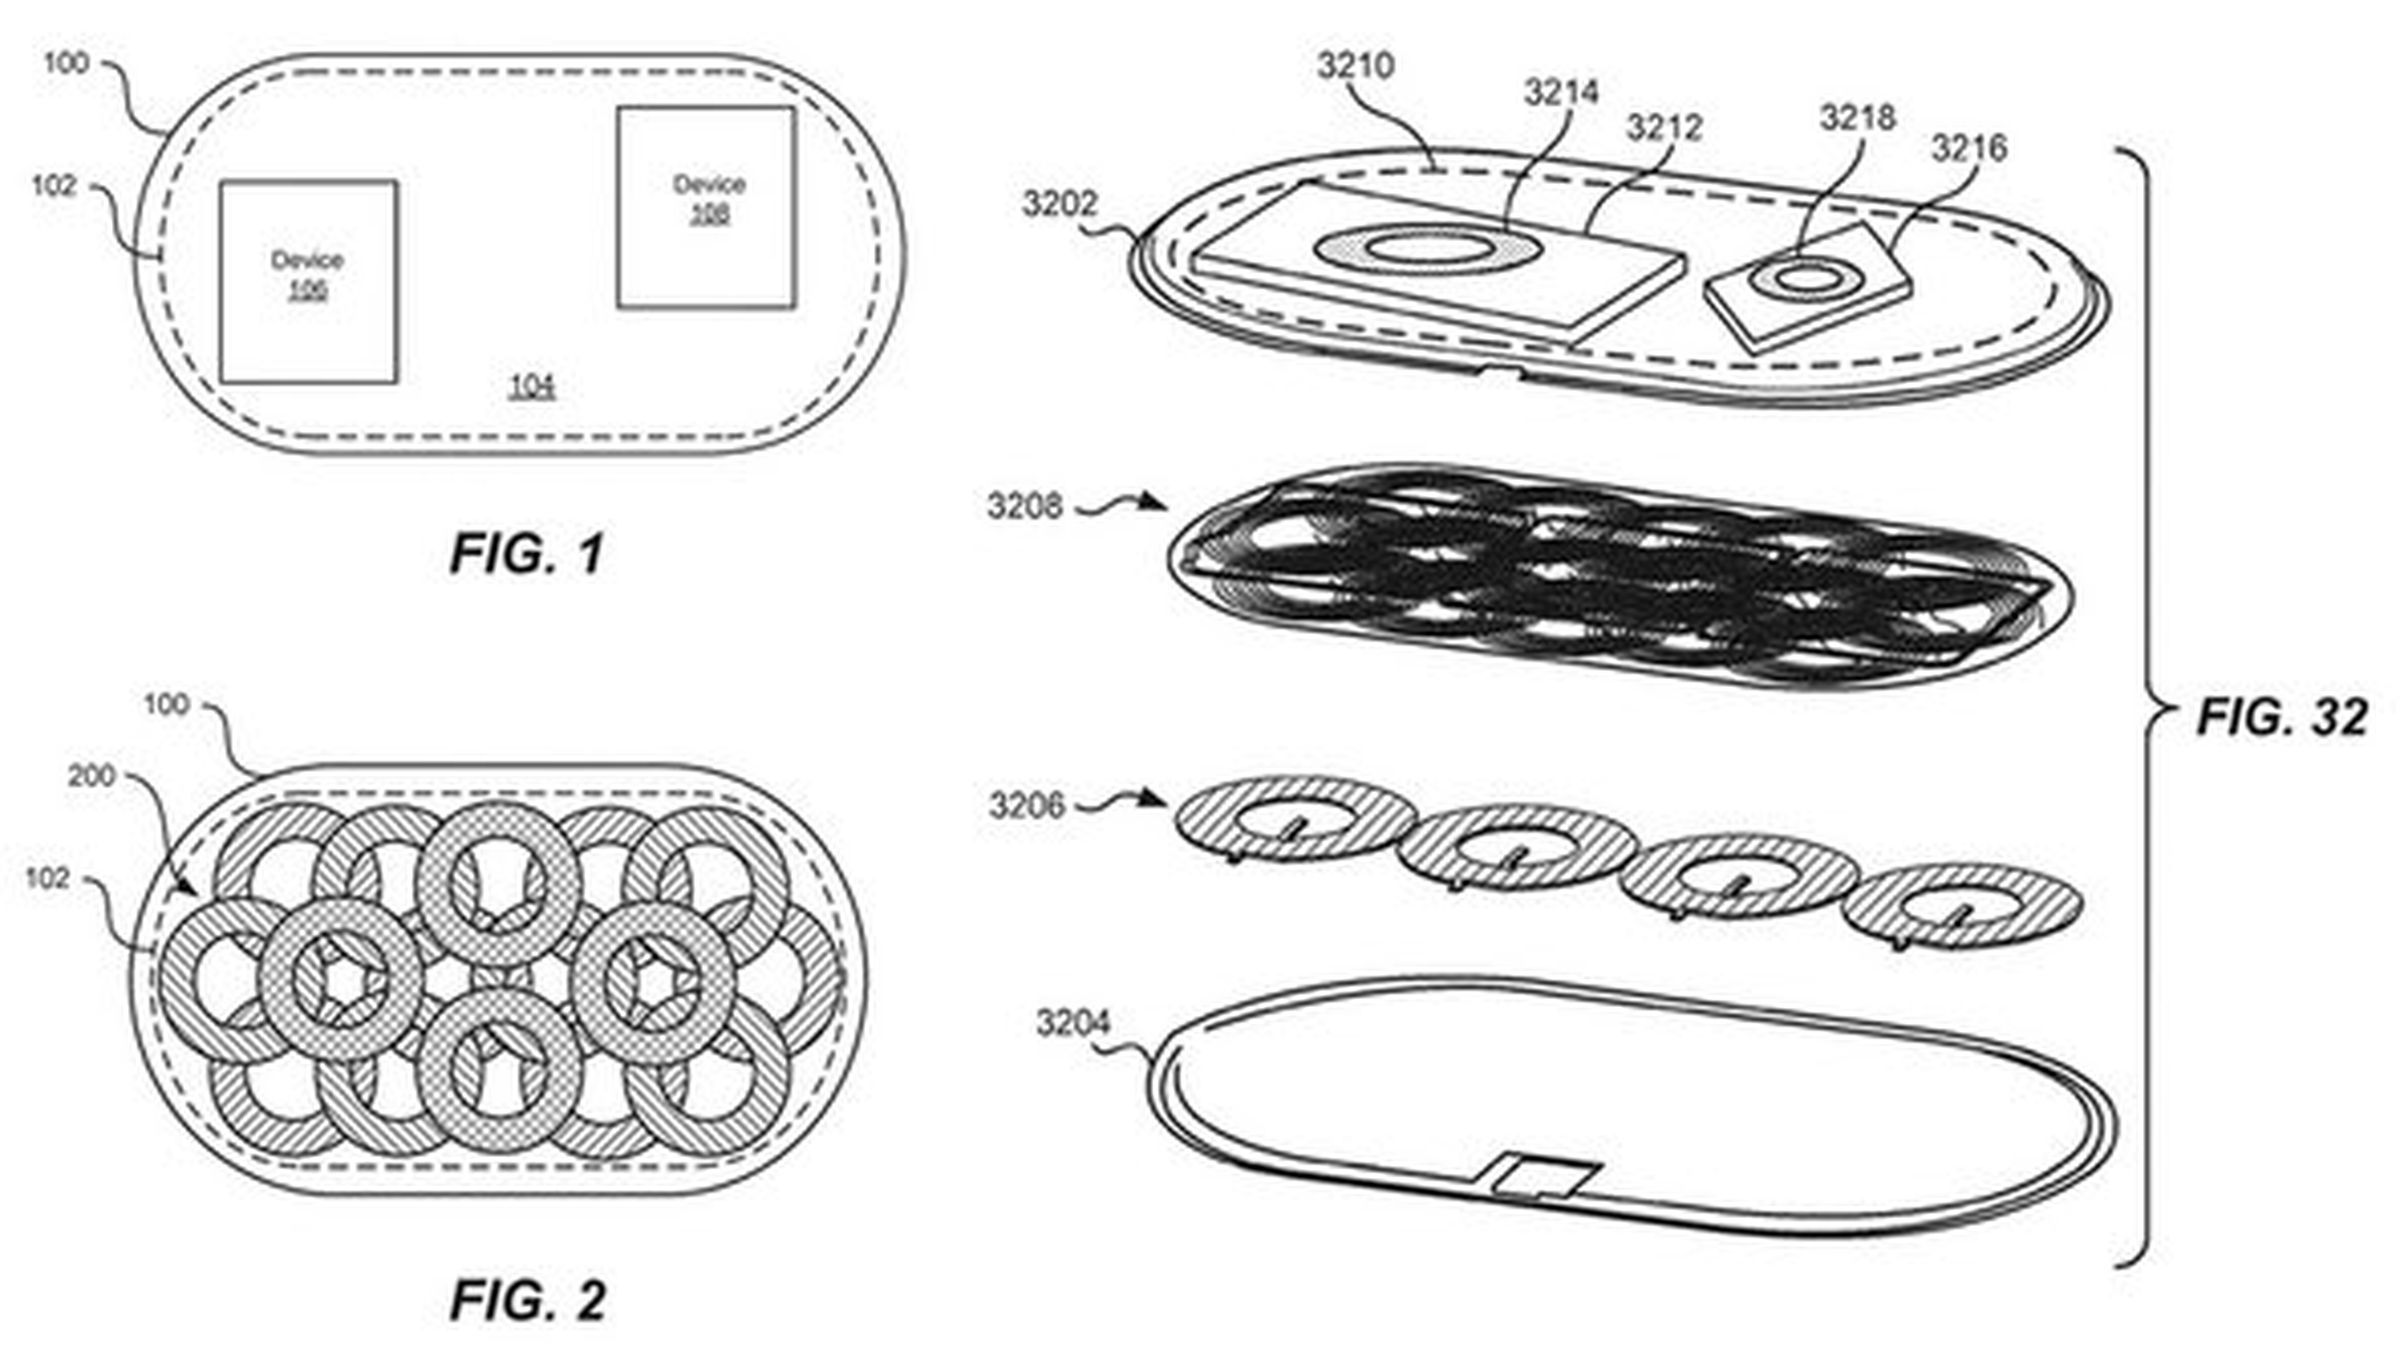 Patent filings show what Apple’s AirPower charger might have looked like inside.